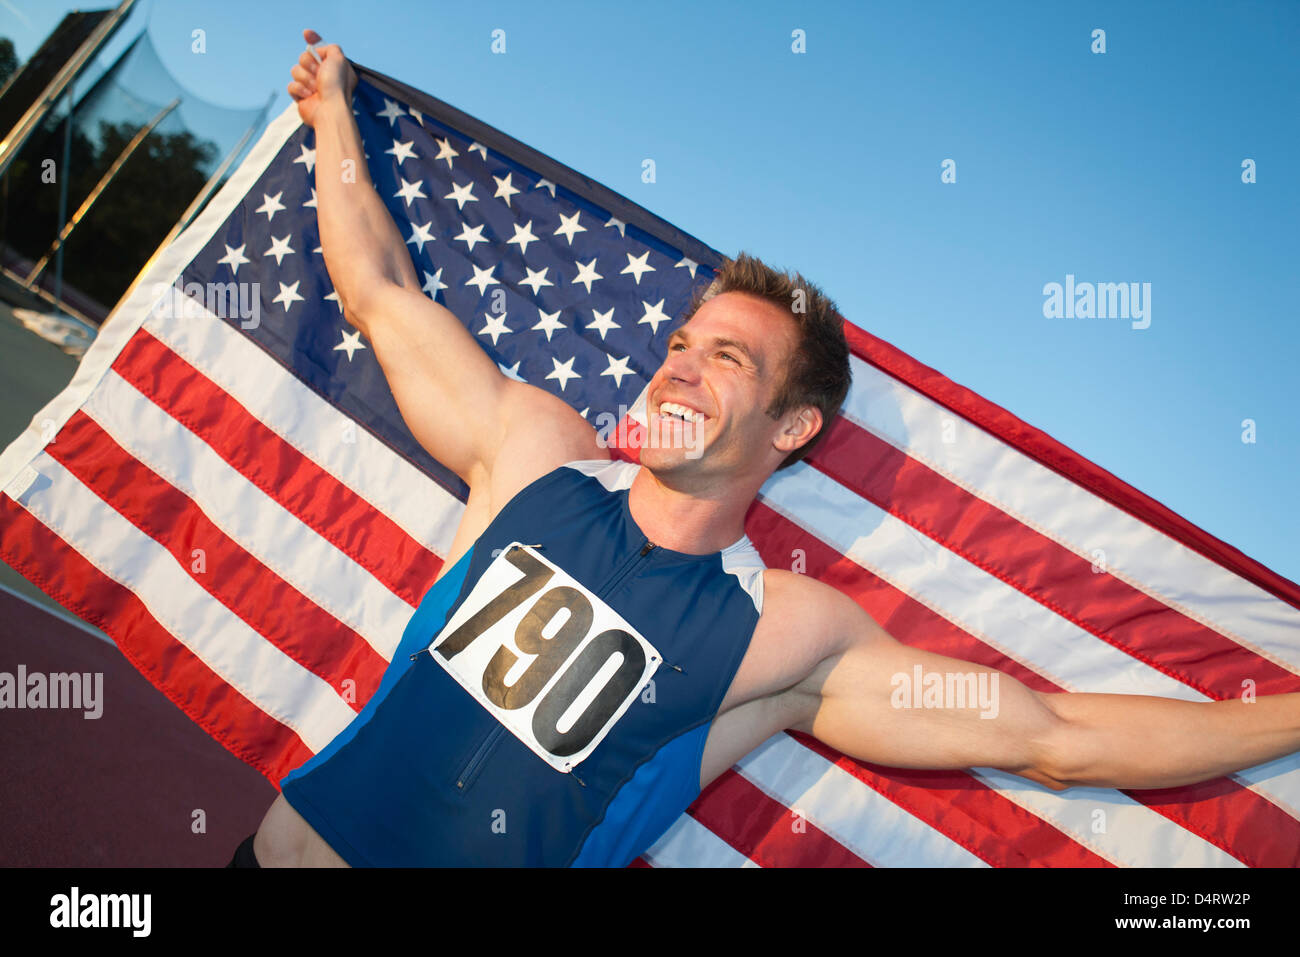 Male athlete holding up American flag Stock Photo